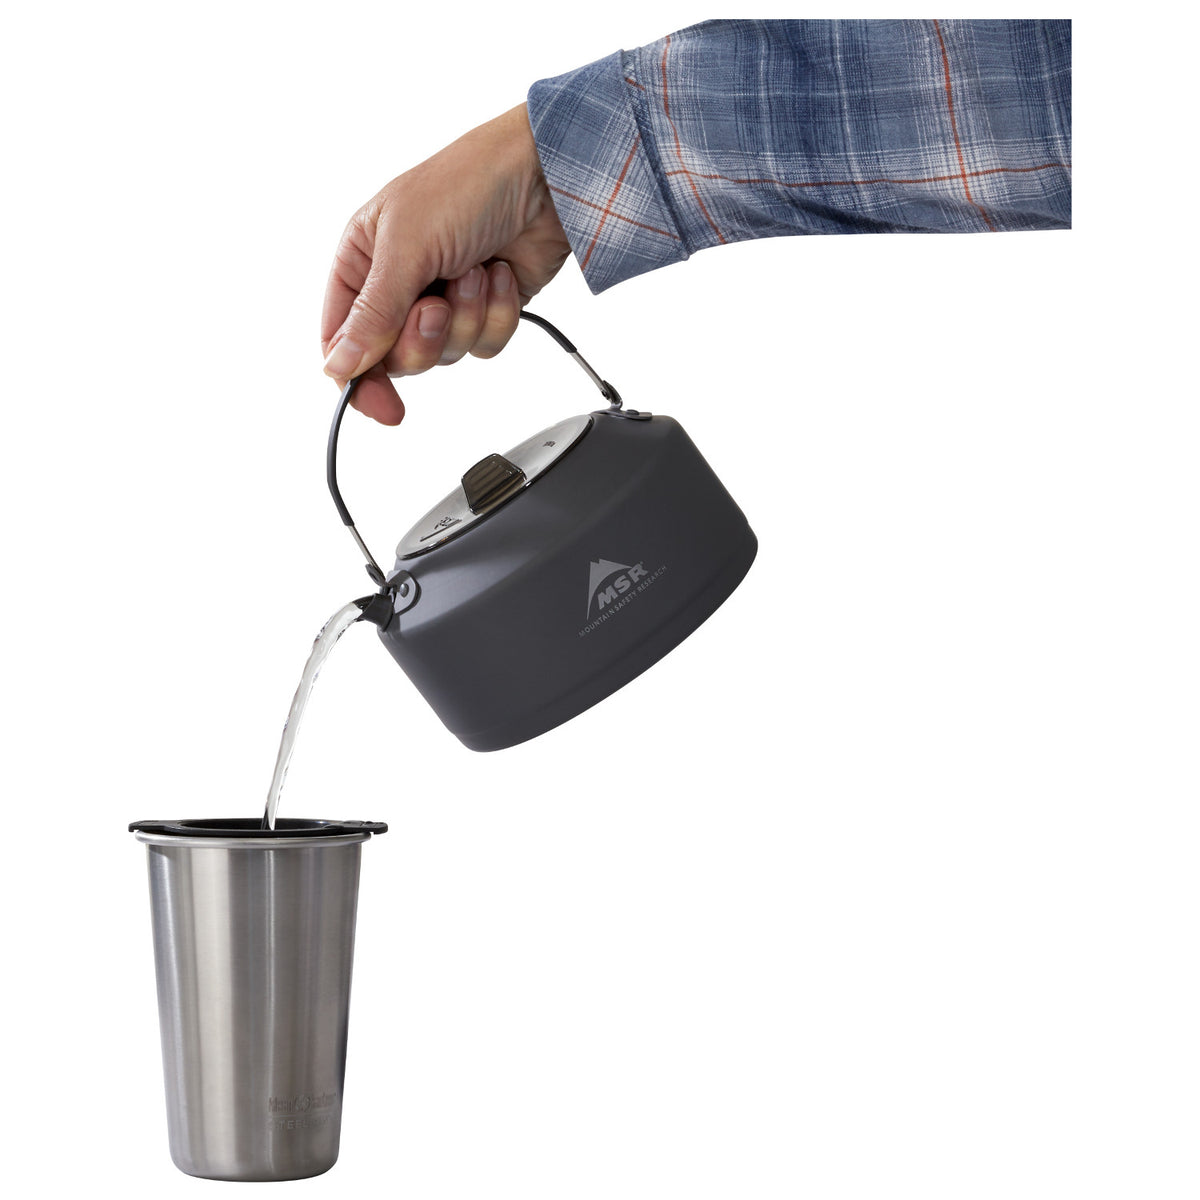 MSR Pika 1.0L Teapot shown in use pouring water into cup